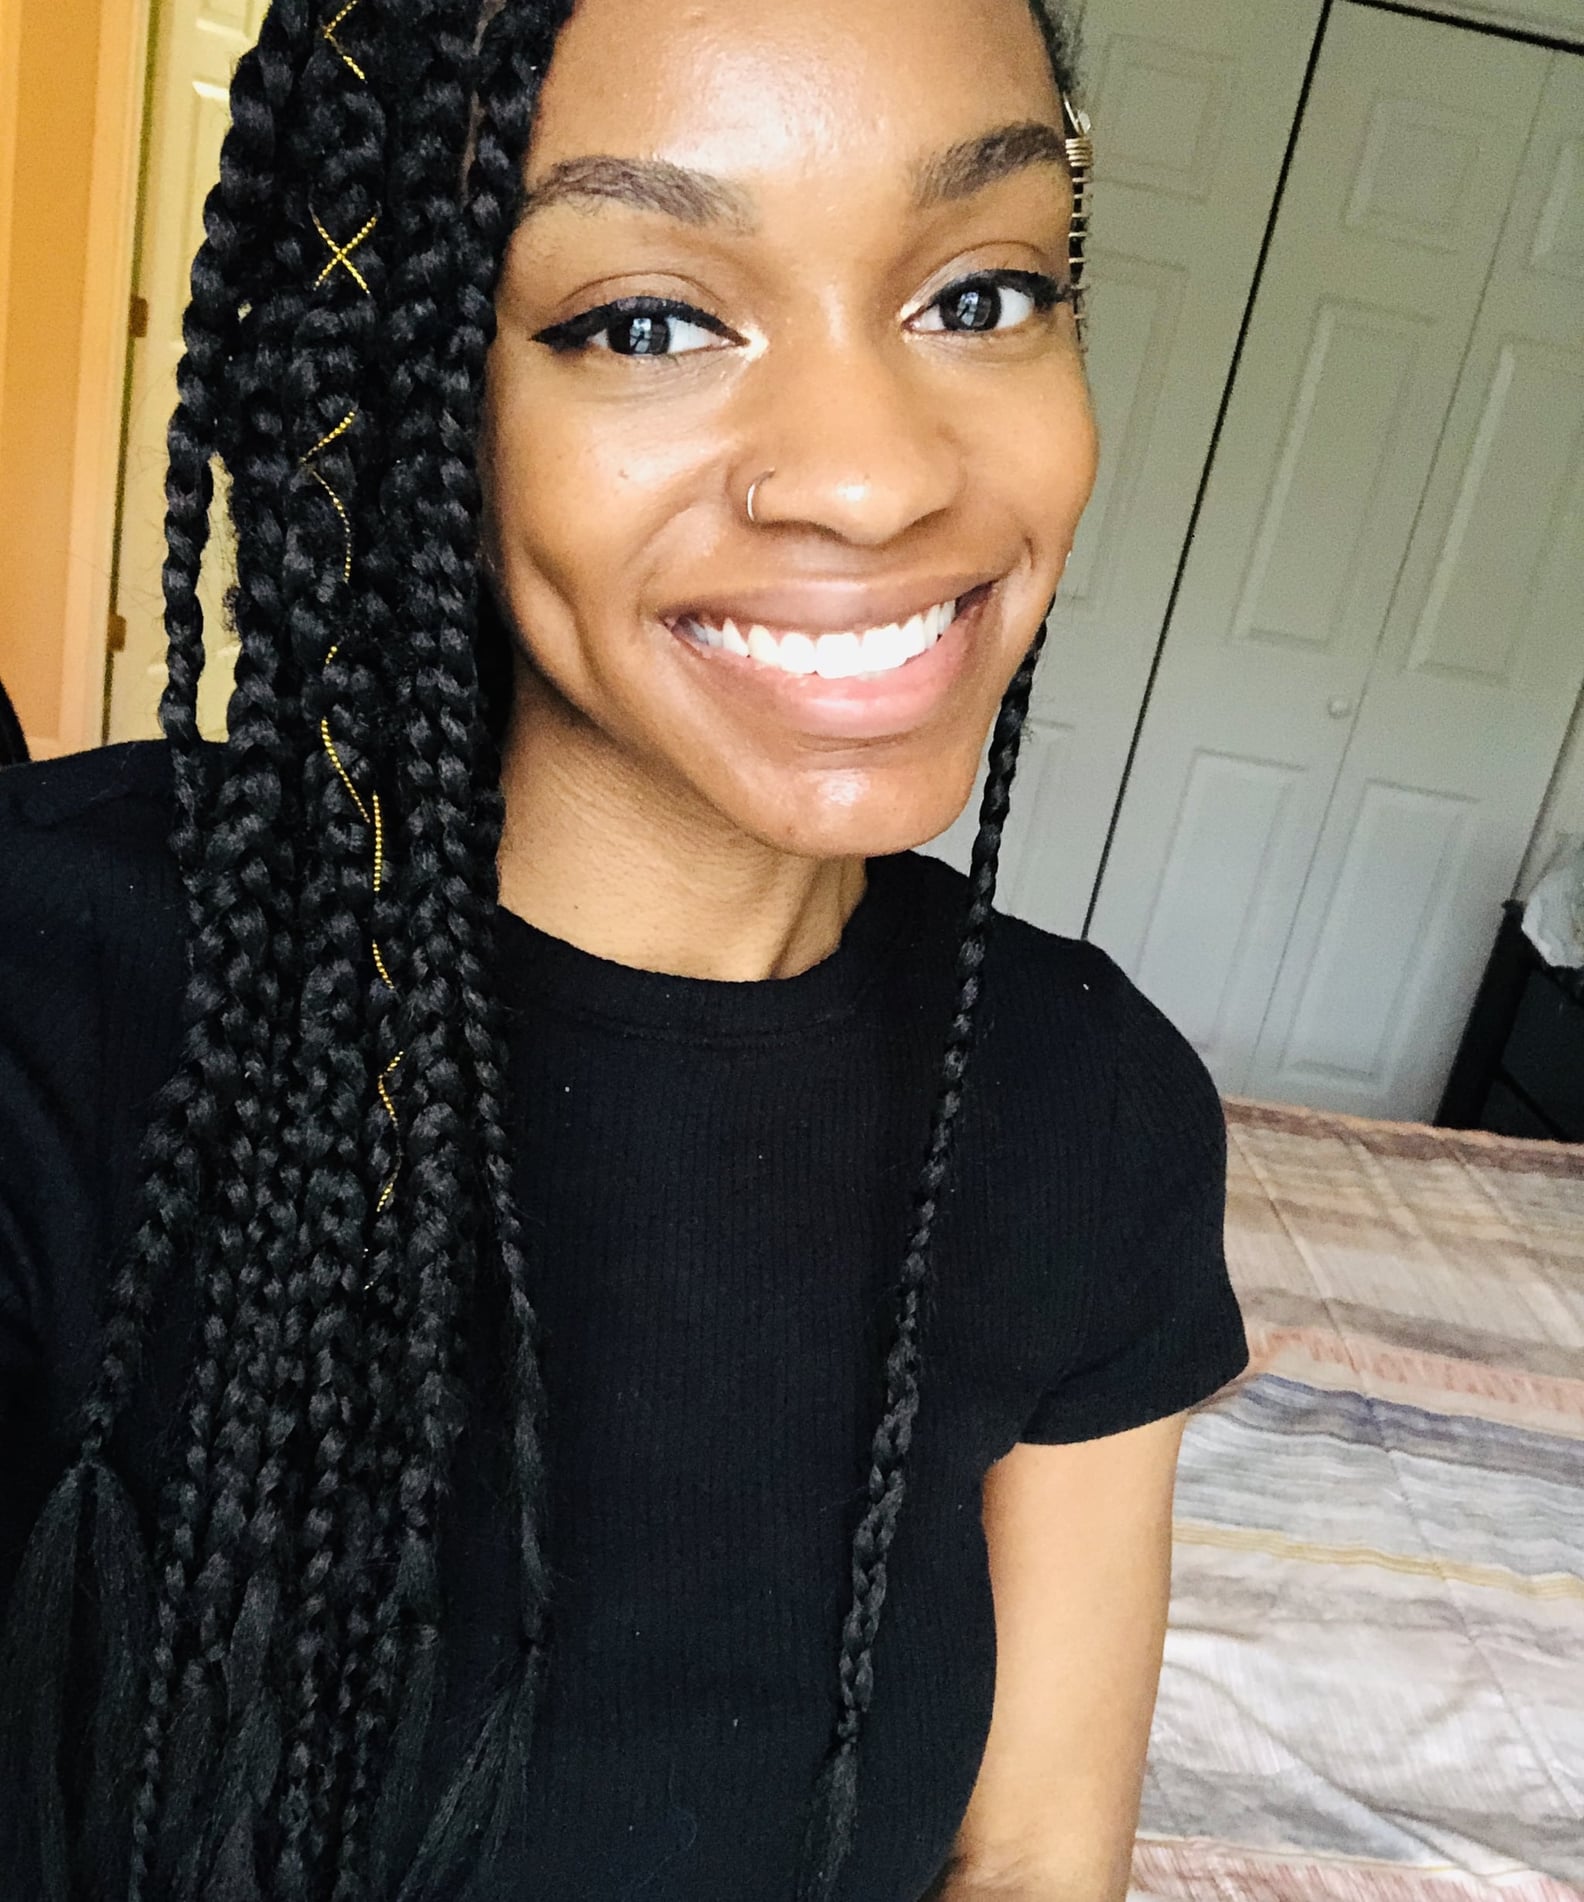 I Did a Box Braids Hairstyle at Home: Editor Experiment | POPSUGAR Beauty